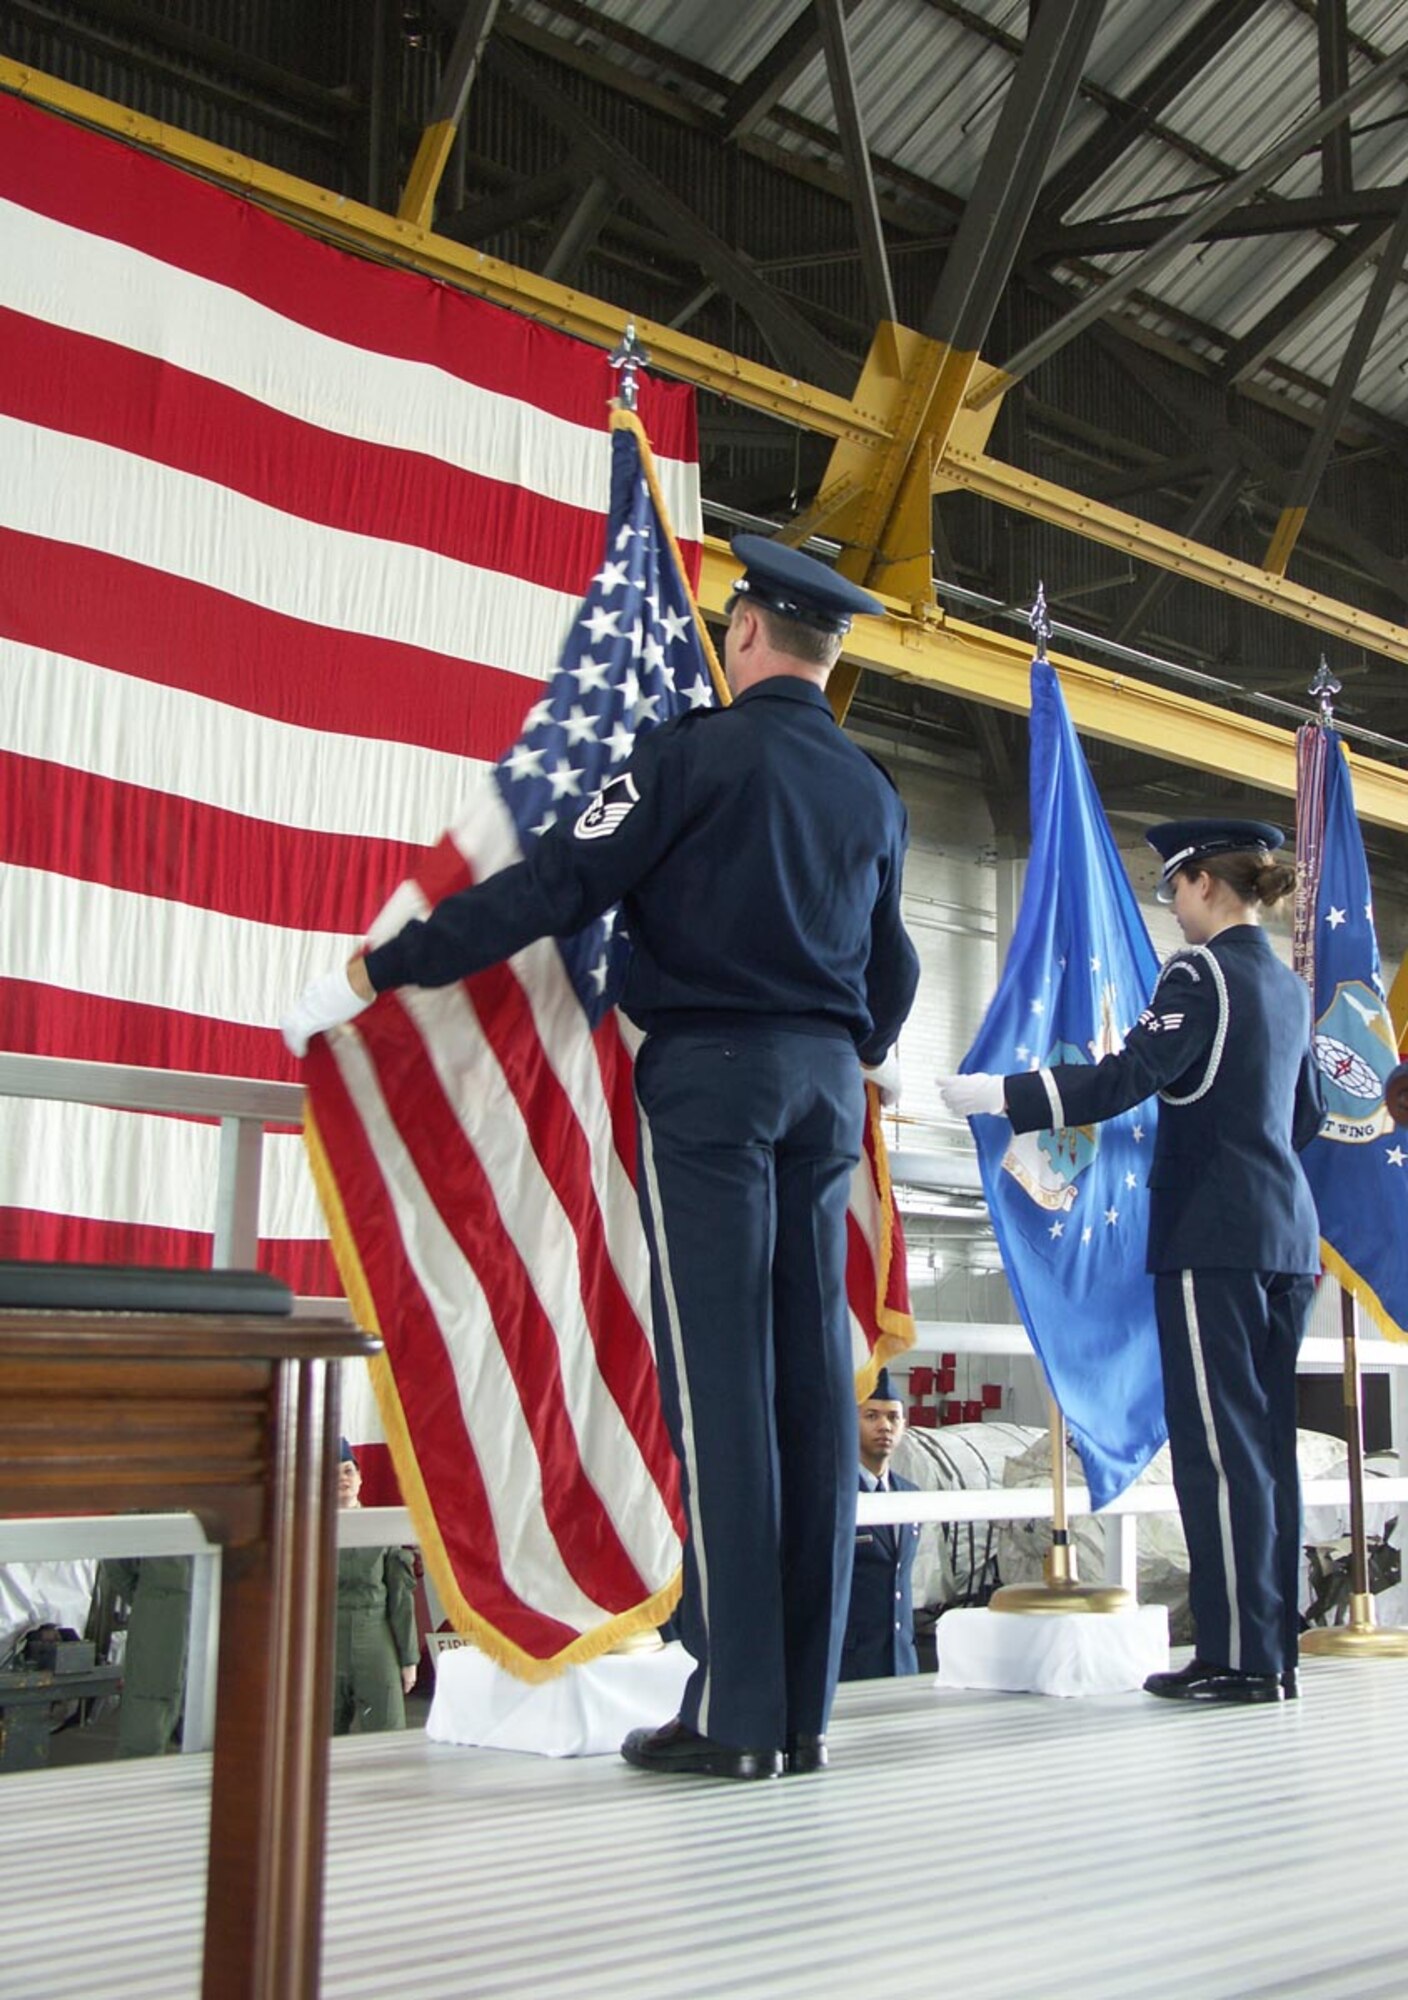 Members of the 932nd Airlift Wing's honor guard prepare the American flag for Col. Maryanne Miller's change of command ceremony.